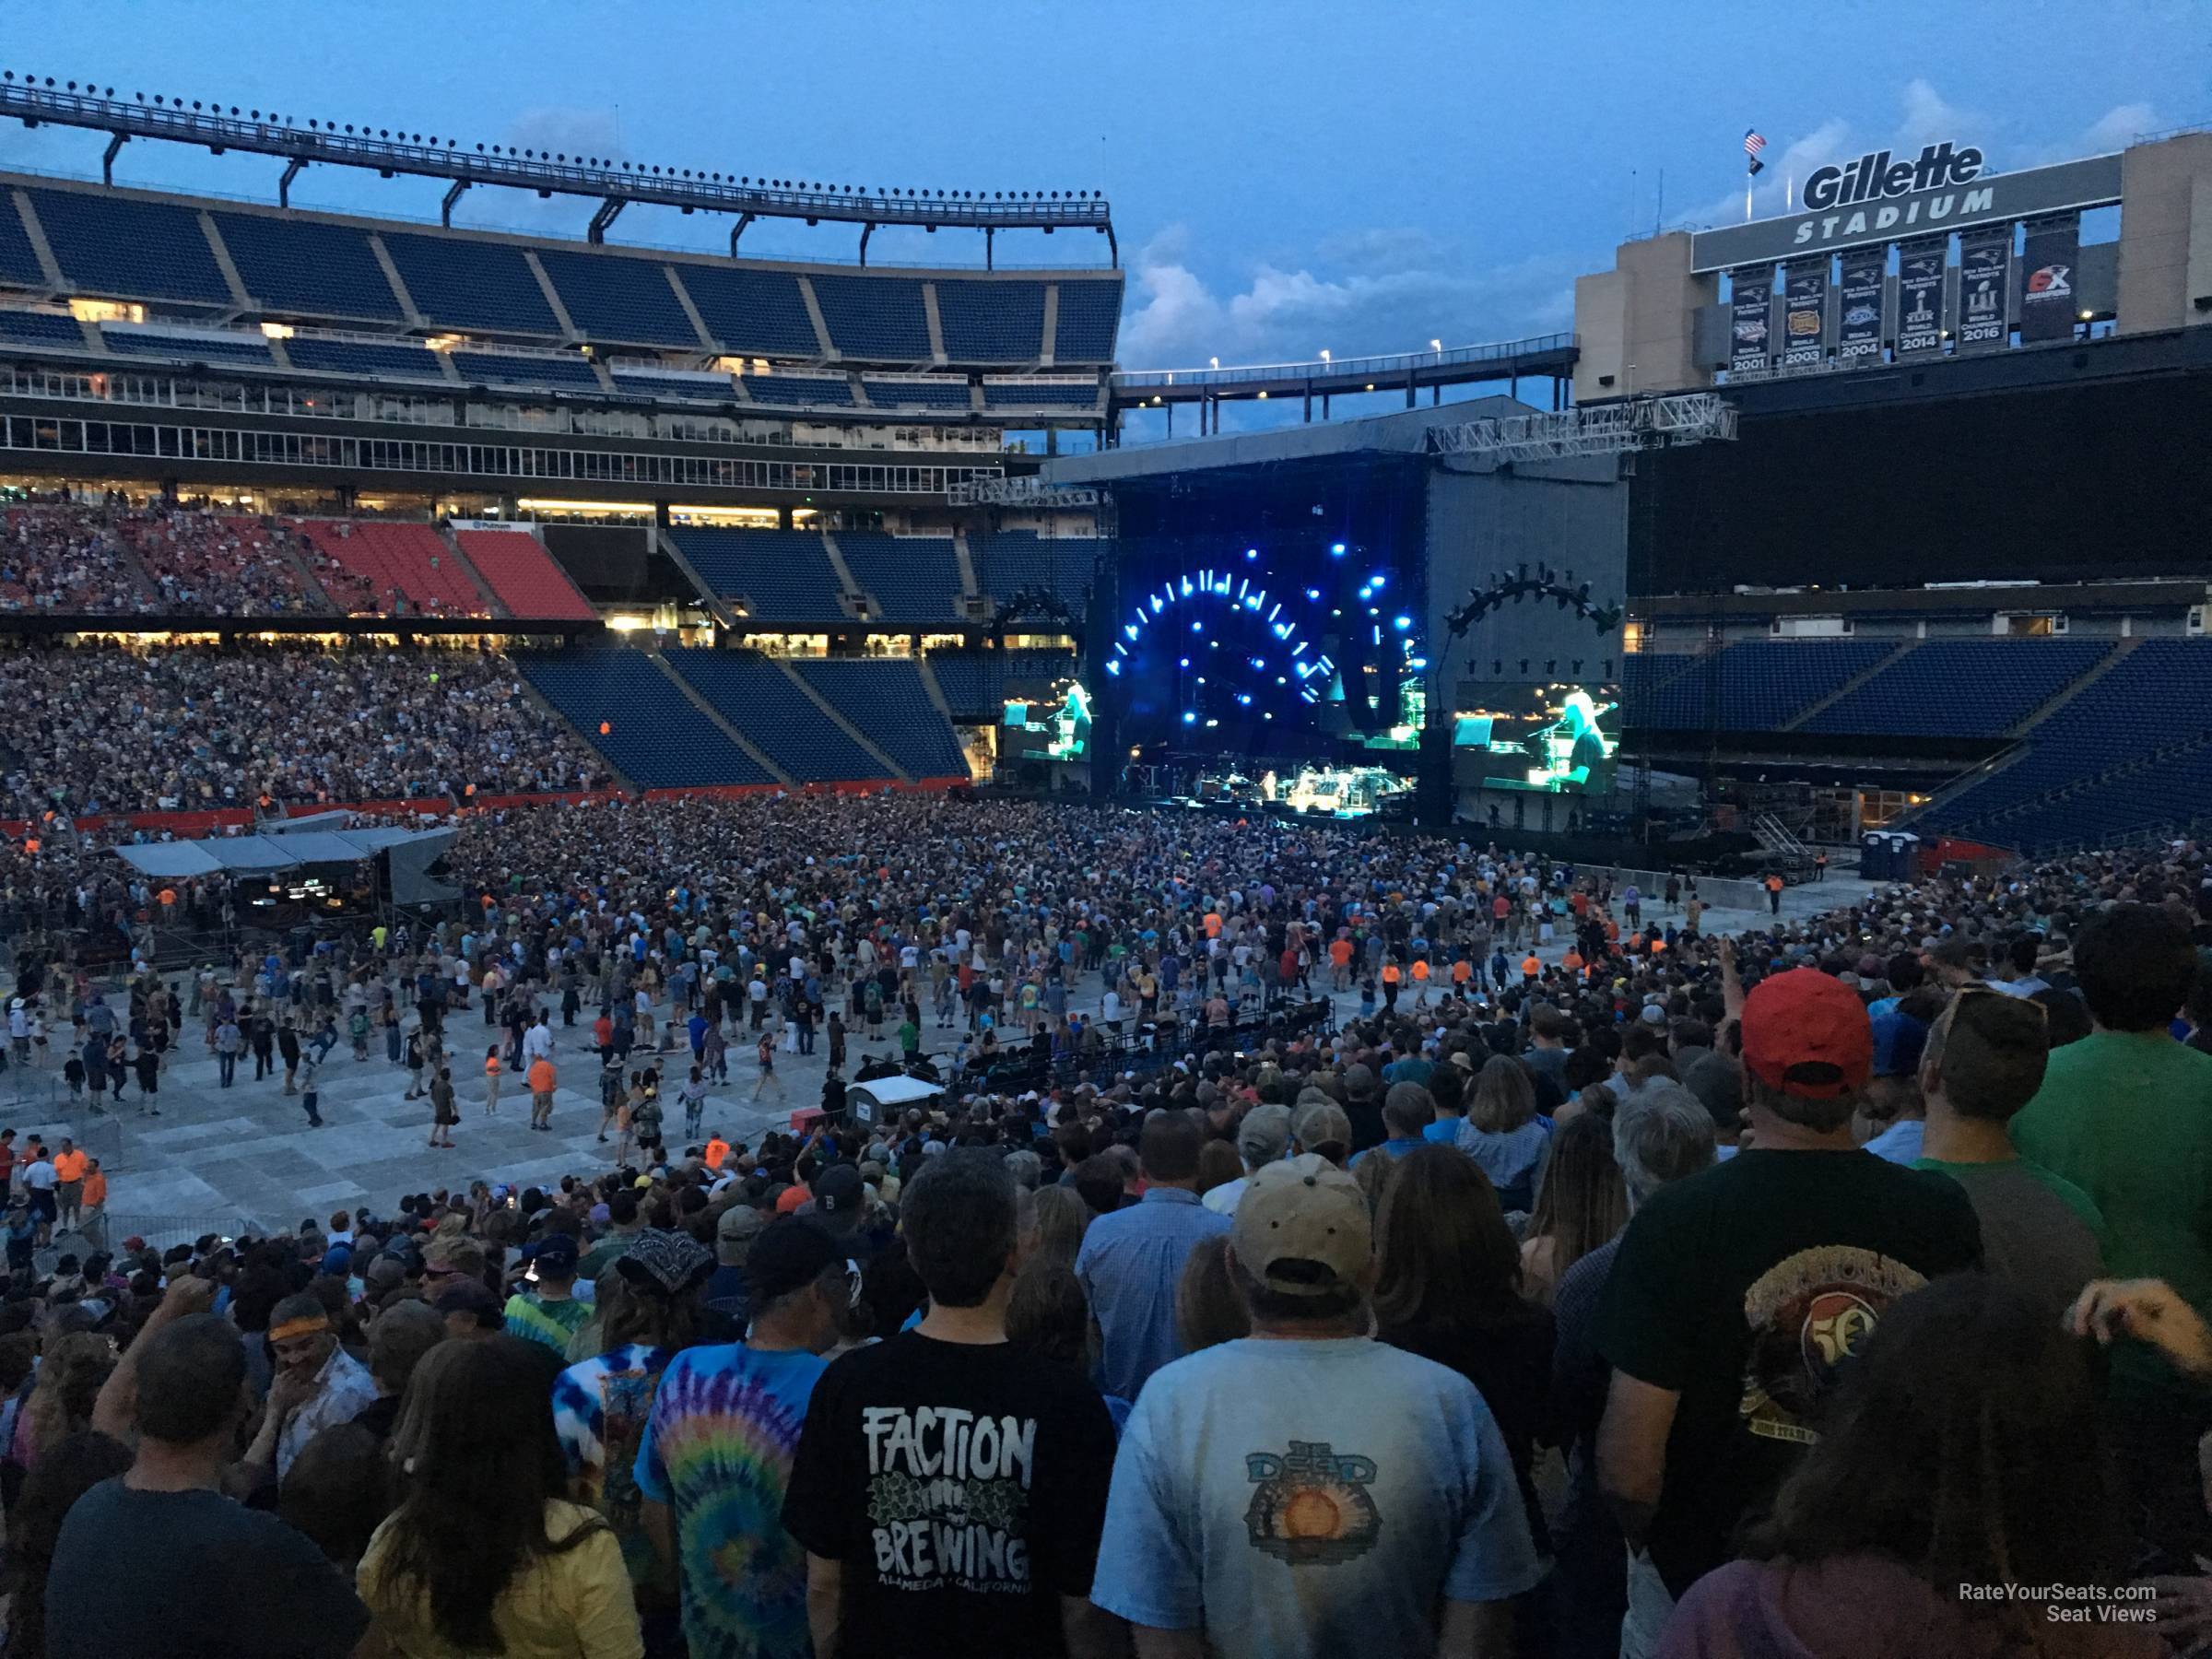 section 133, row 38 seat view  for concert - gillette stadium